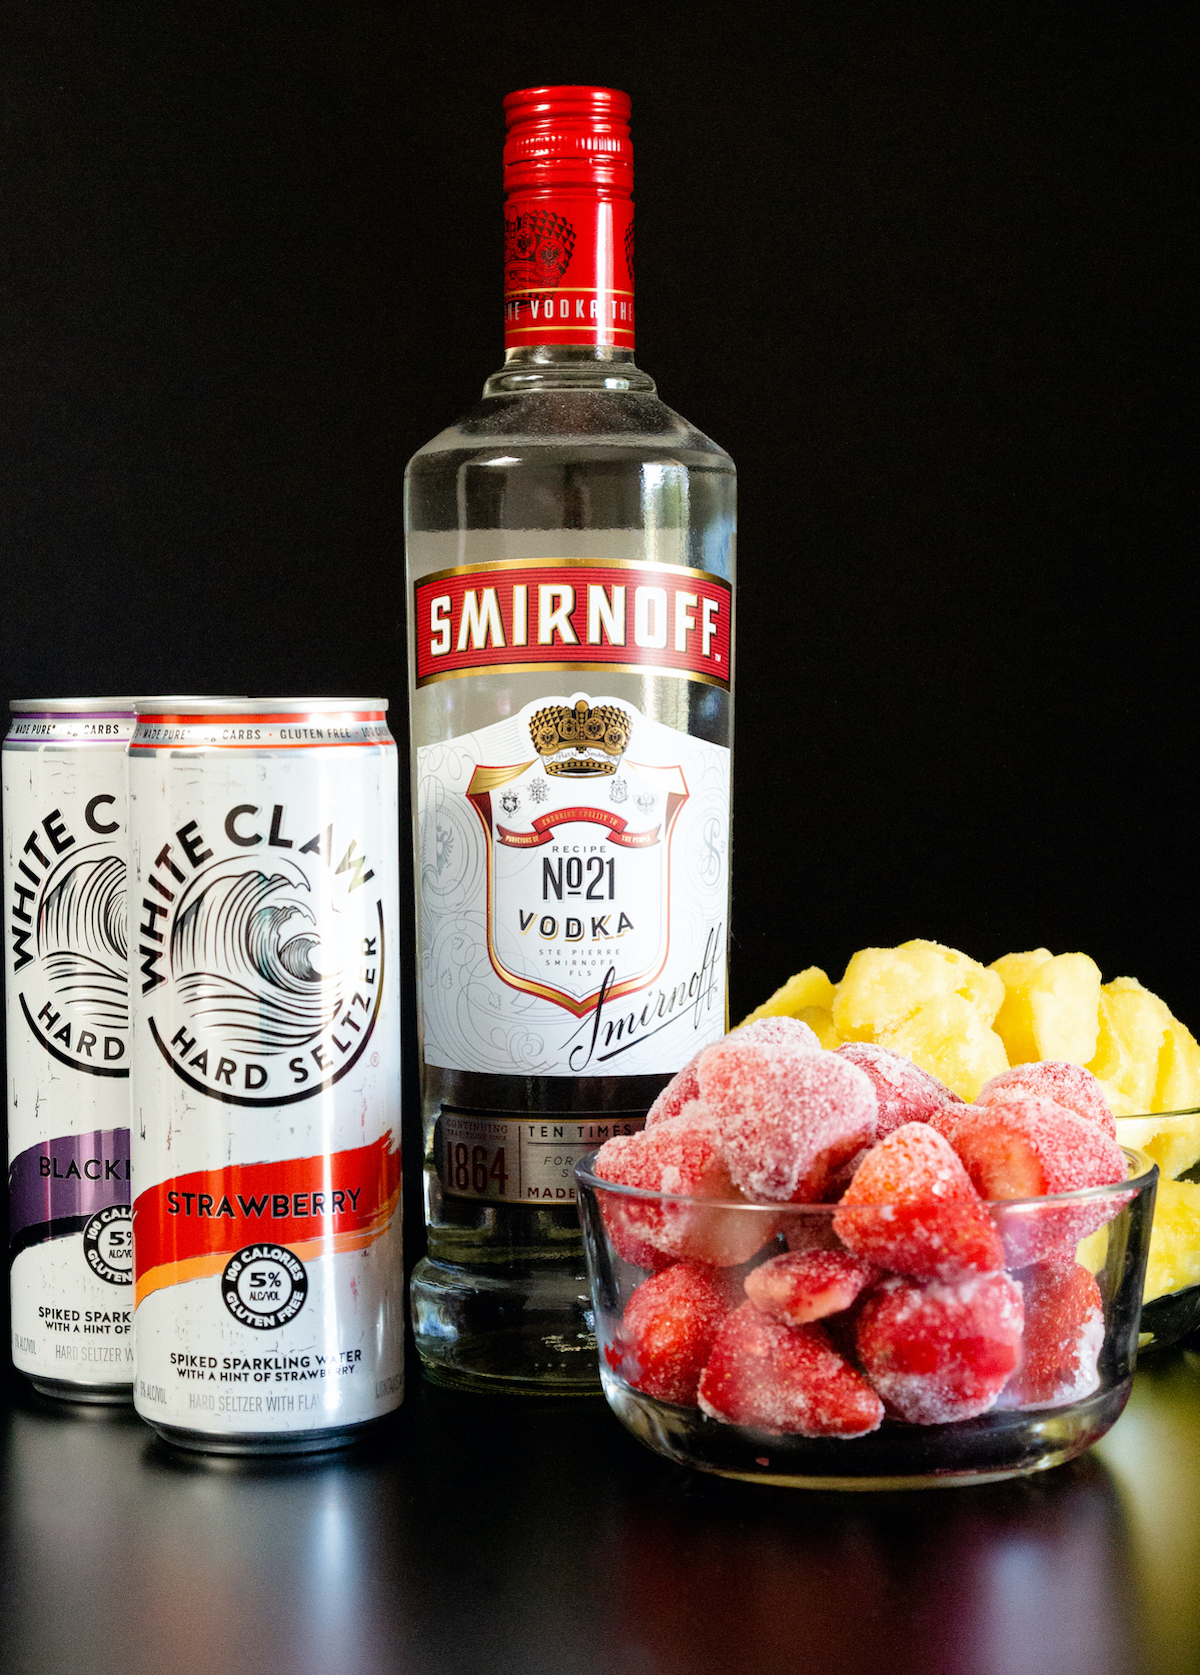 All the ingredients to make a white claw slushy sit on a black background. A bottle of smirnoff vodka, white claw cans, and frozen fruit.